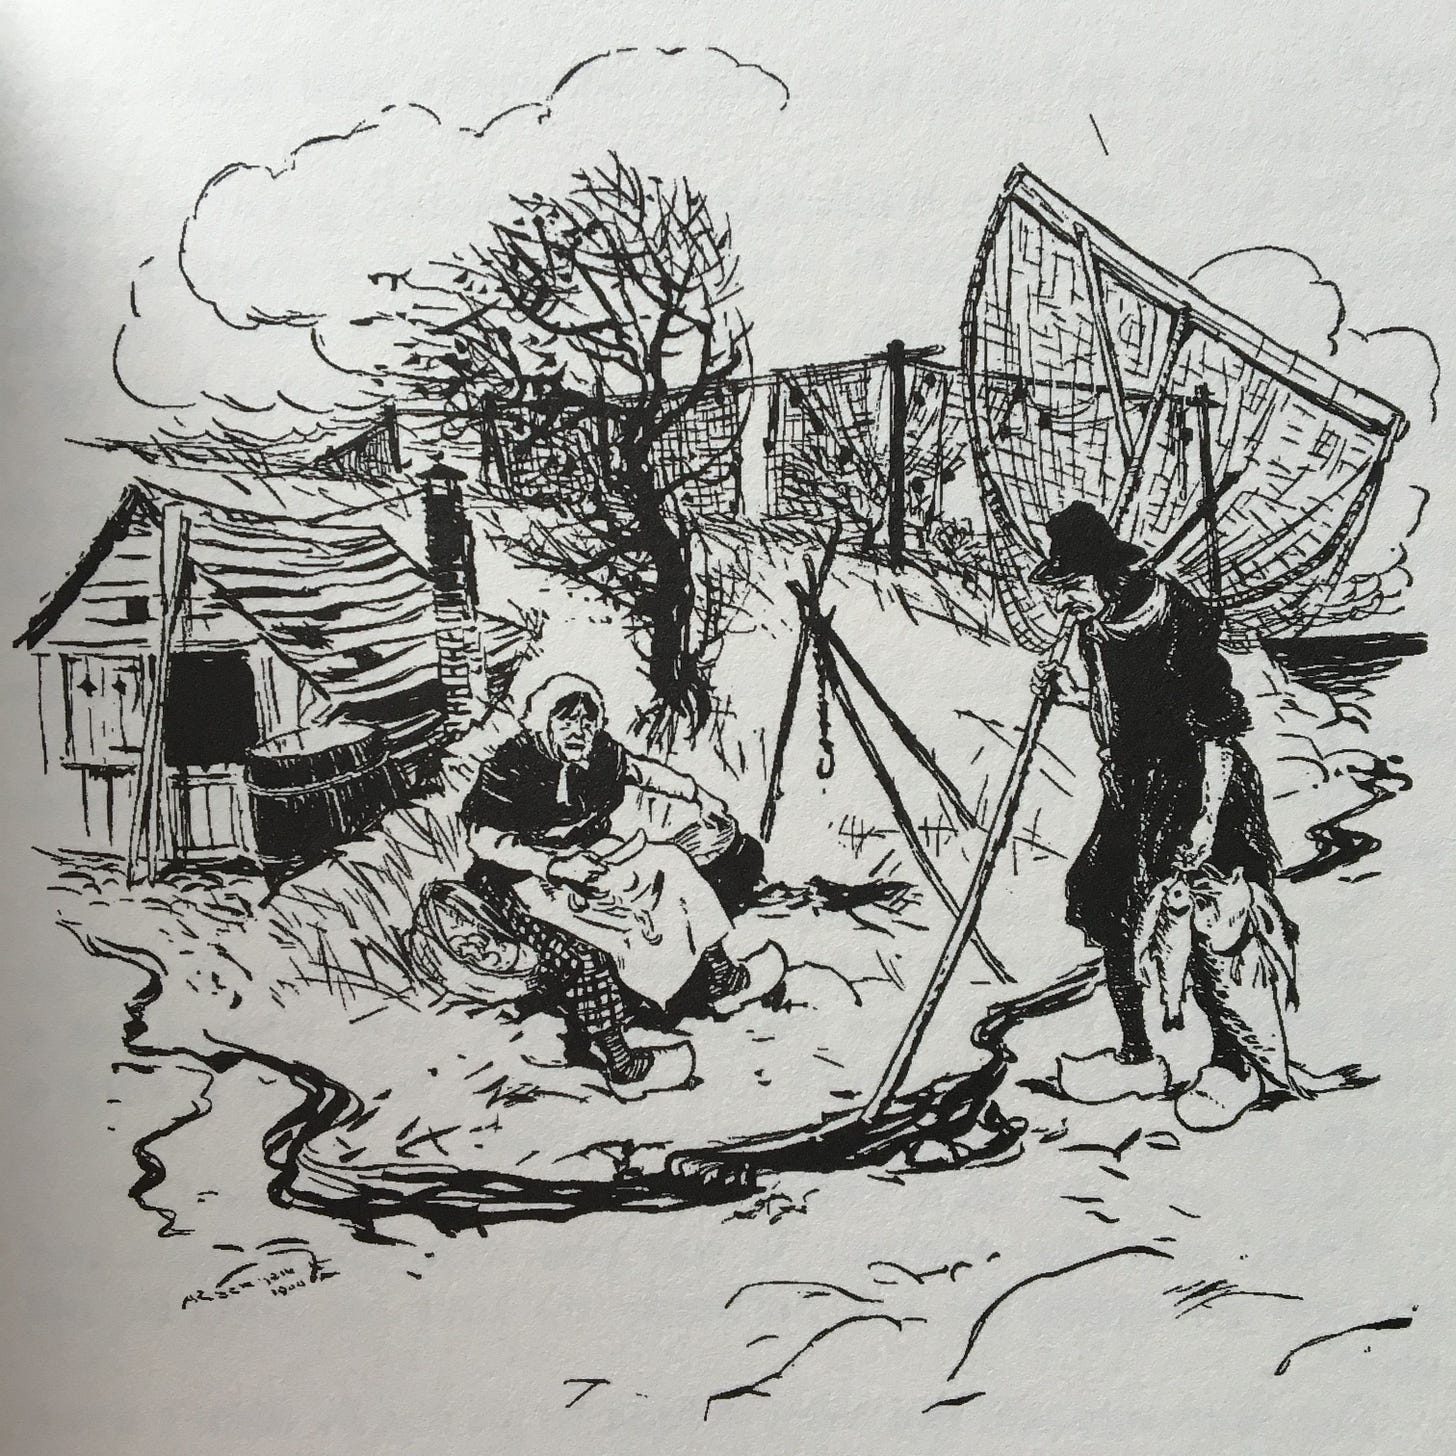 Illustration from Grimm's Fairy Tales of the Fisherman and His Wife